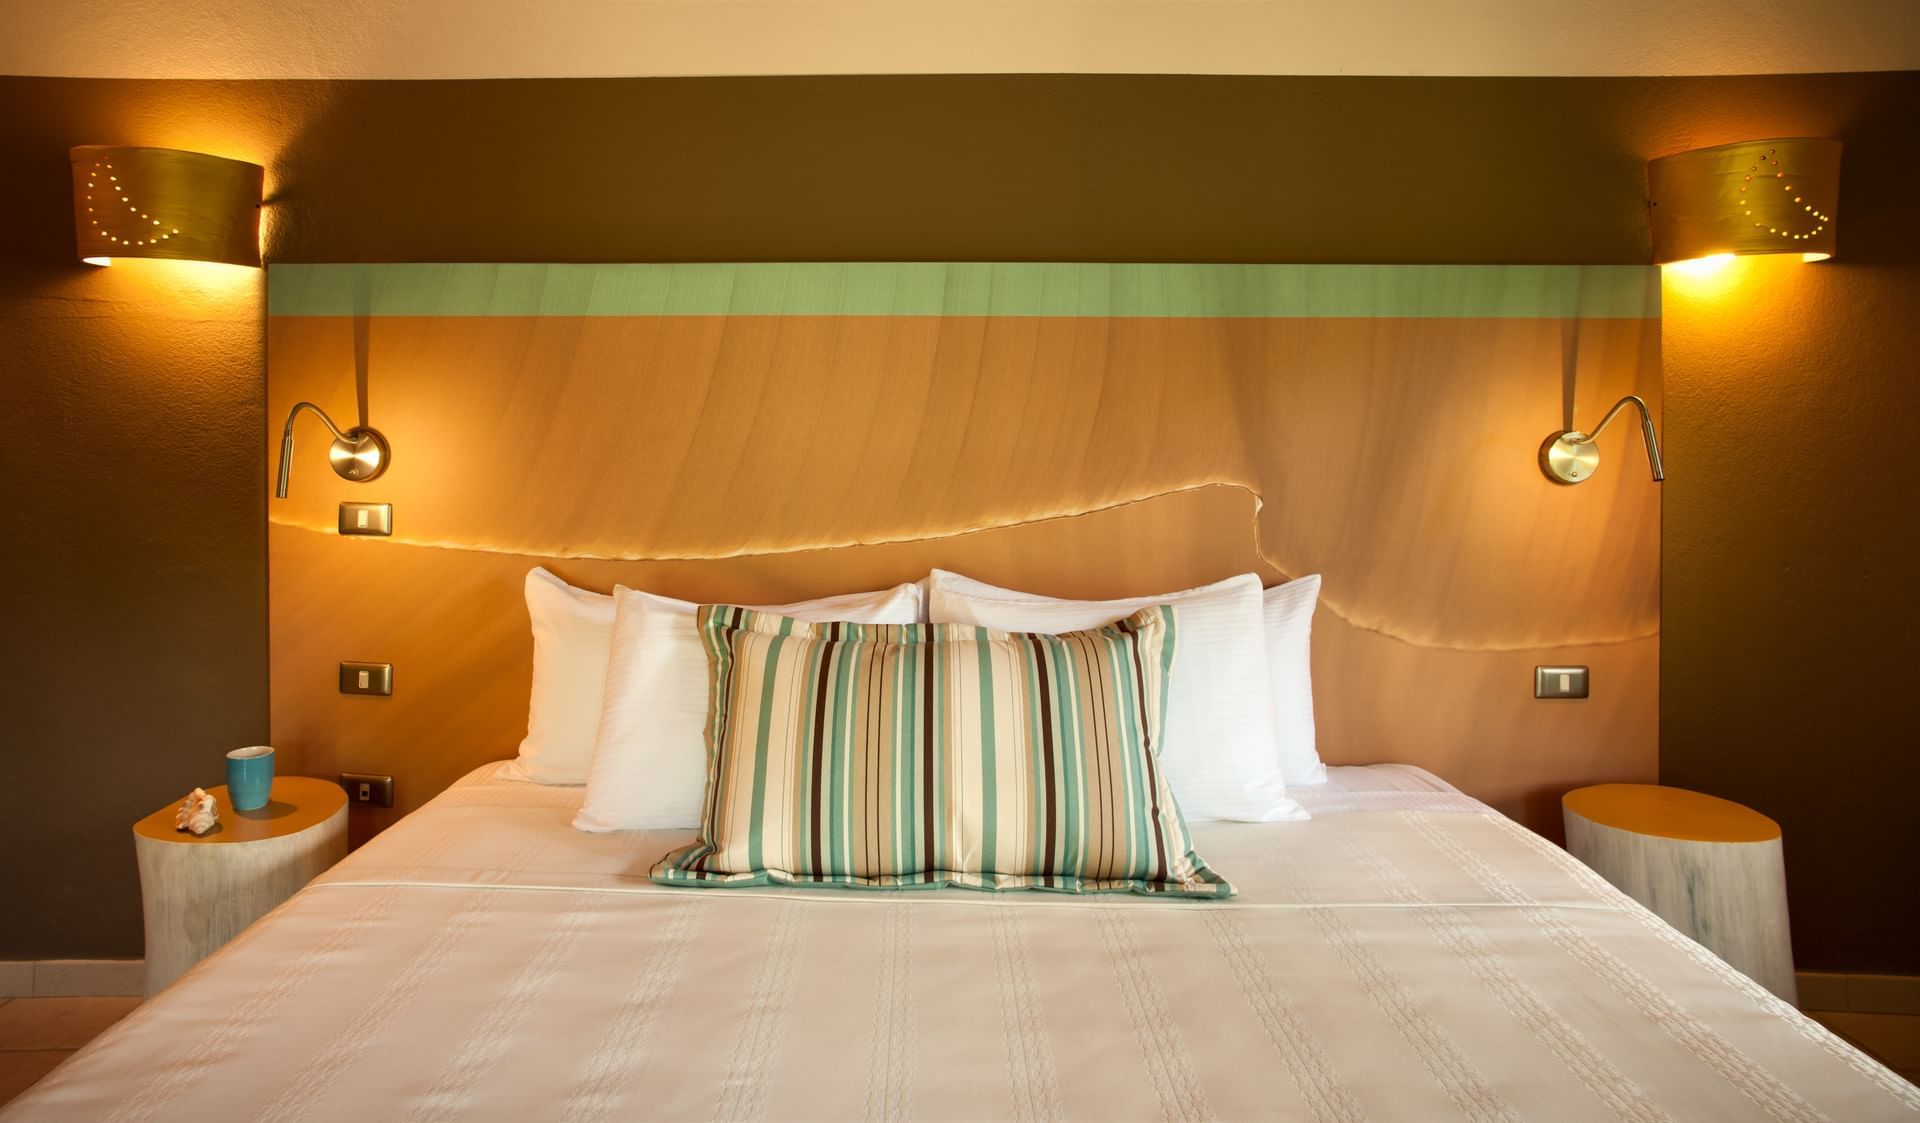 Deluxe Room with 1 king bed at Cala Luna Boutique Hotel